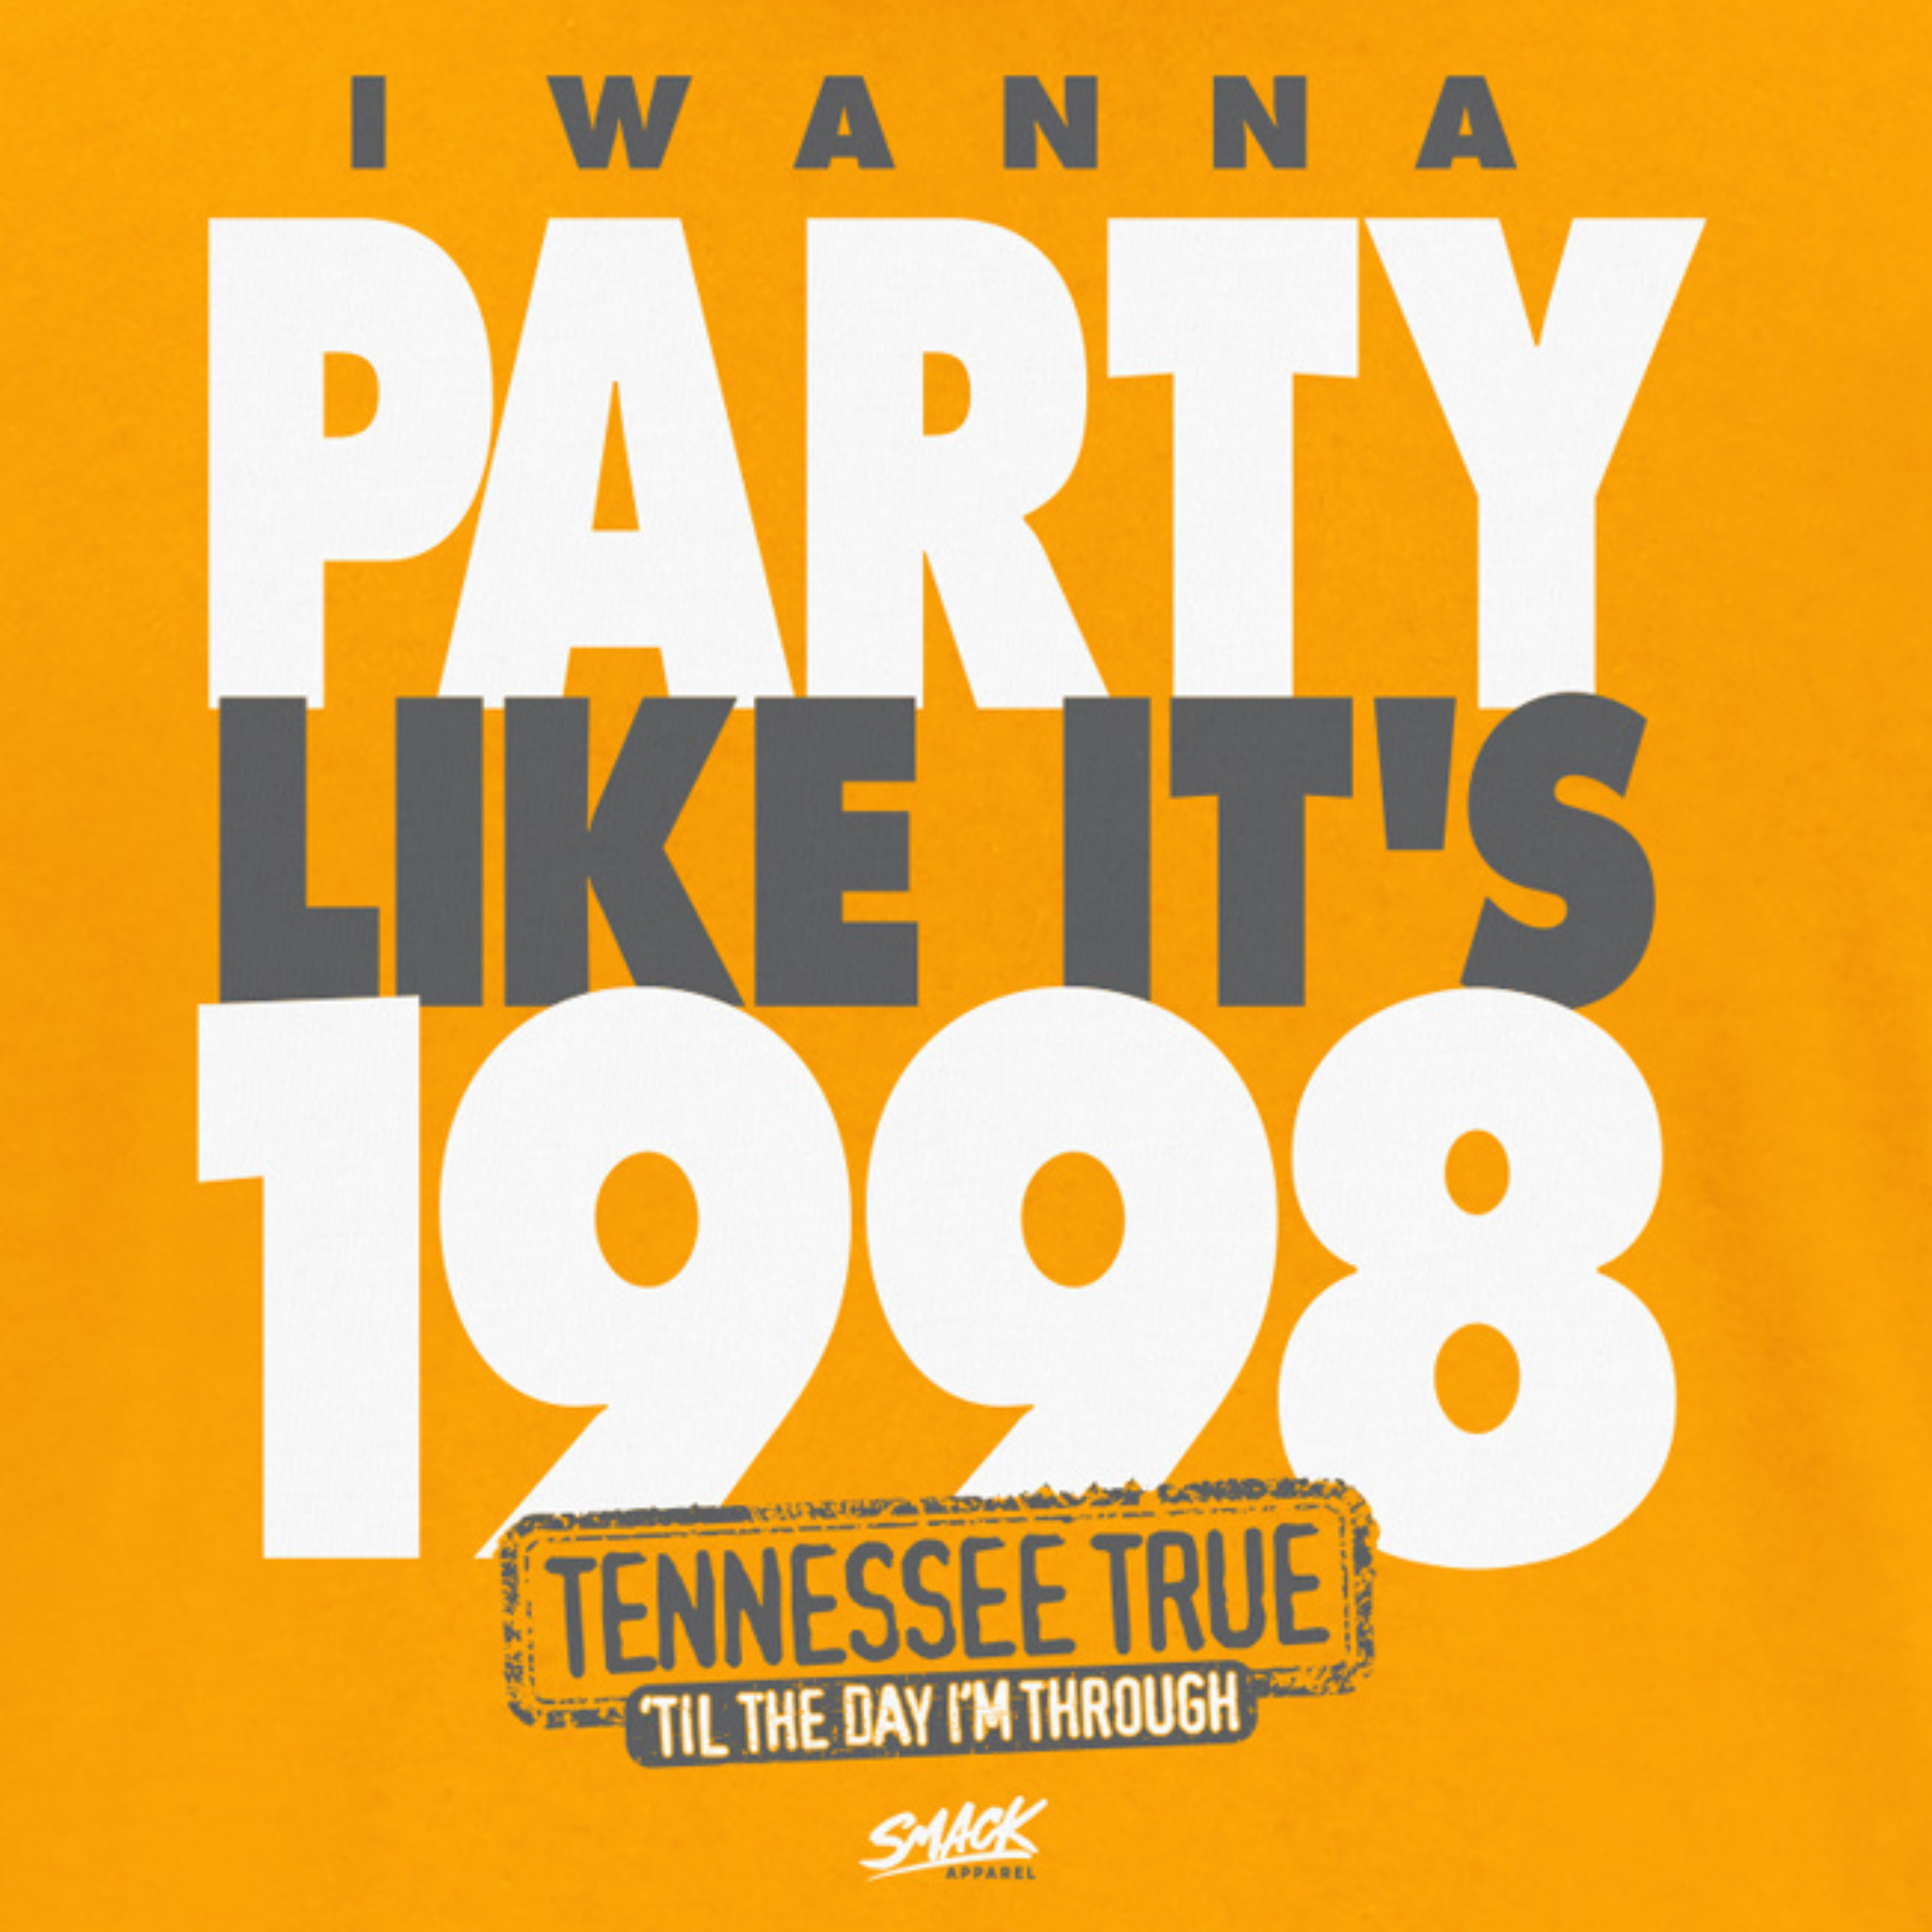 I Wanna Party Like It's 1998 (Someday...)T-Shirt for Tennessee College Football Fans